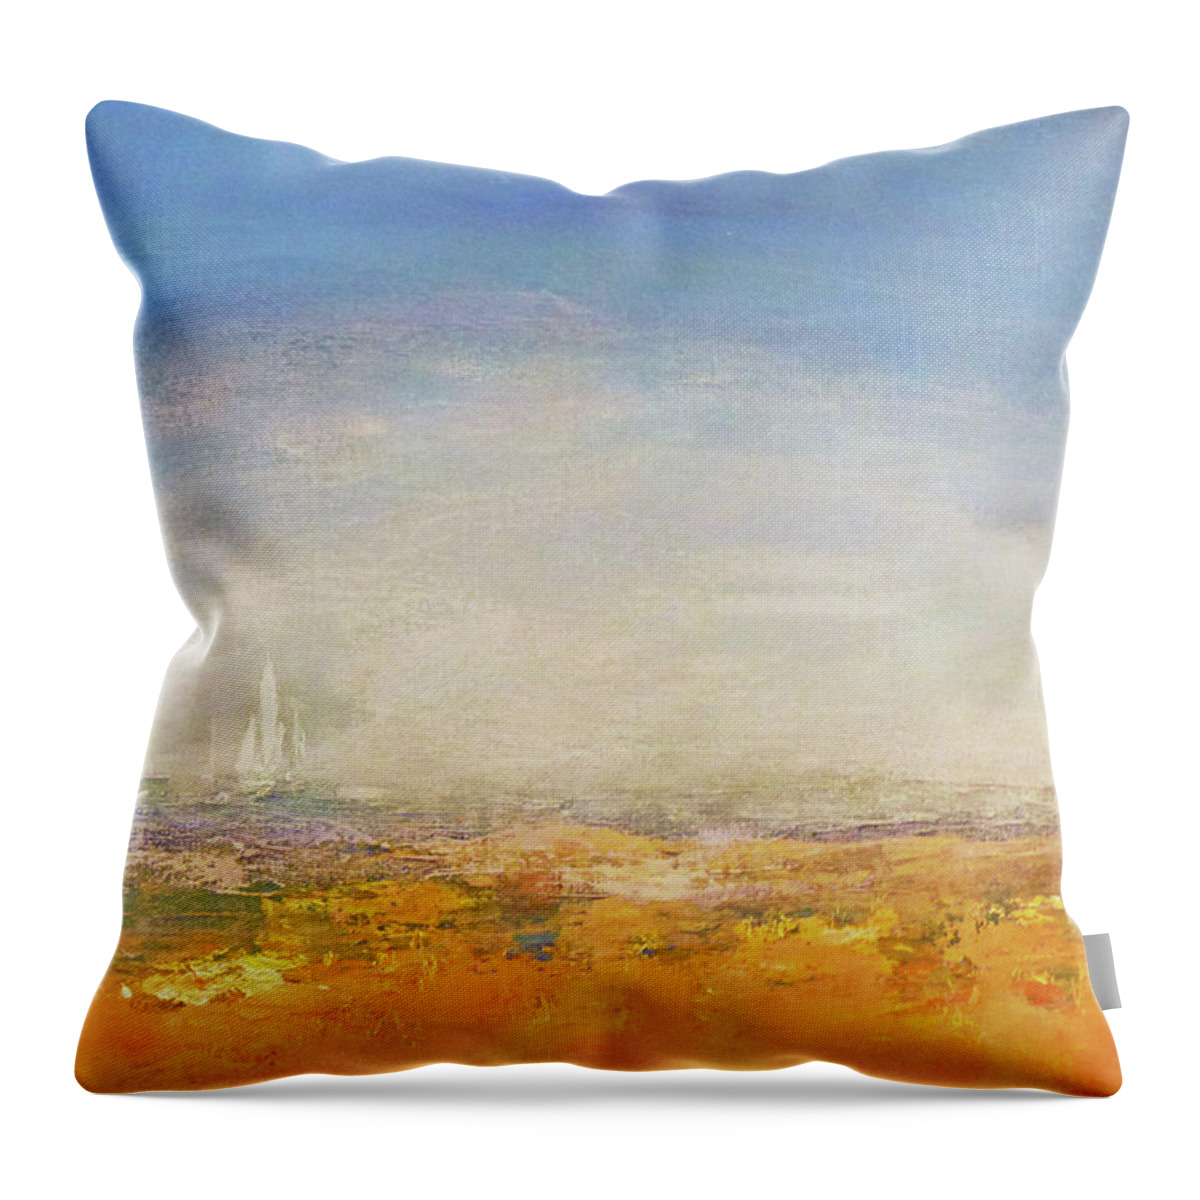 Rising Mist And A Sunny Day;abstract;landscape;seascape;award Winning Throw Pillow featuring the painting Rising Mist and a Sunny Day by Sharon Williams Eng